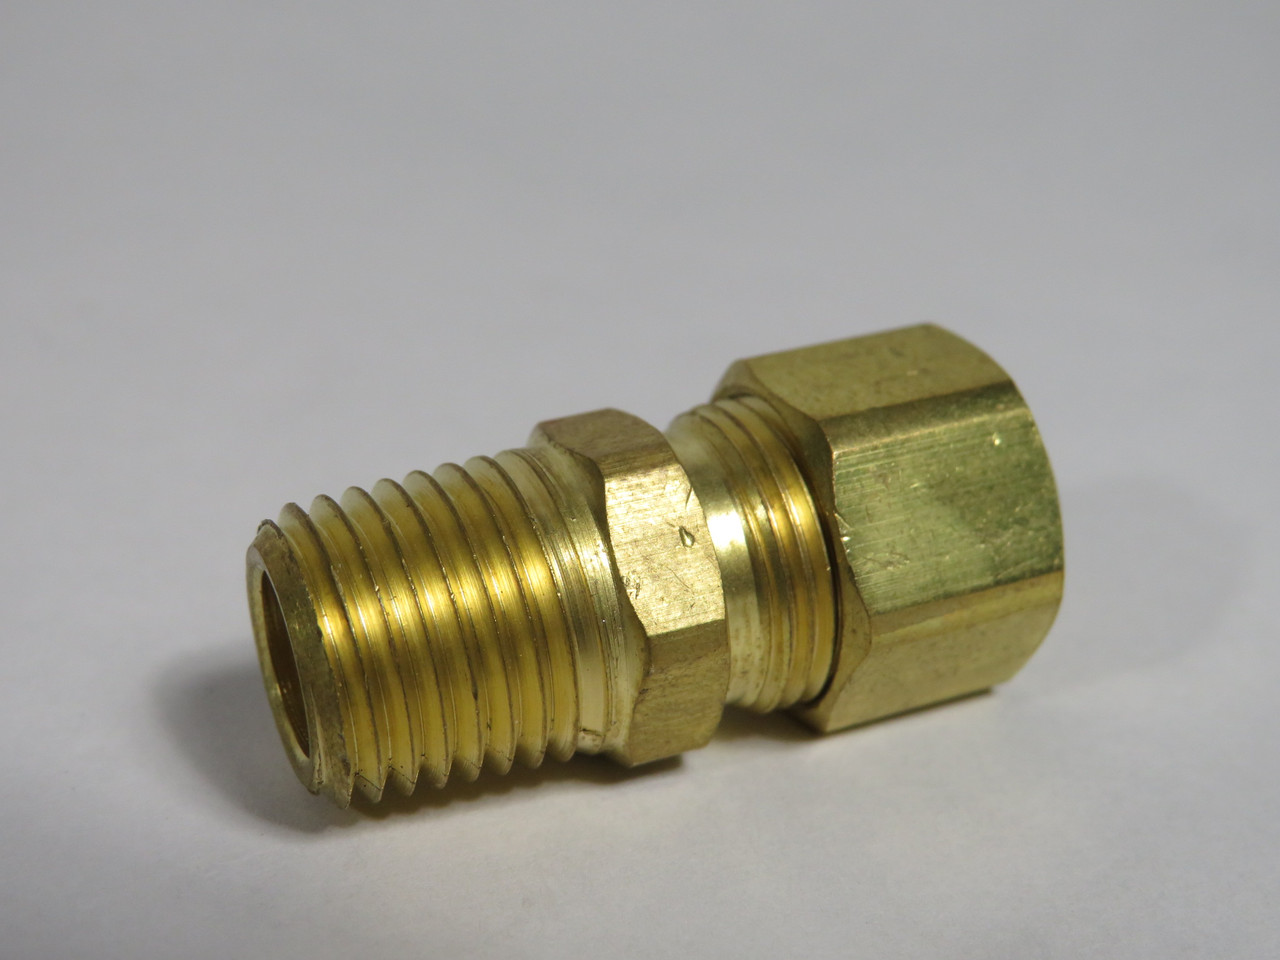 Generic Brass Compression Fitting 1/4" Male NPT 3/8" Tube OD Lot of 4 USED